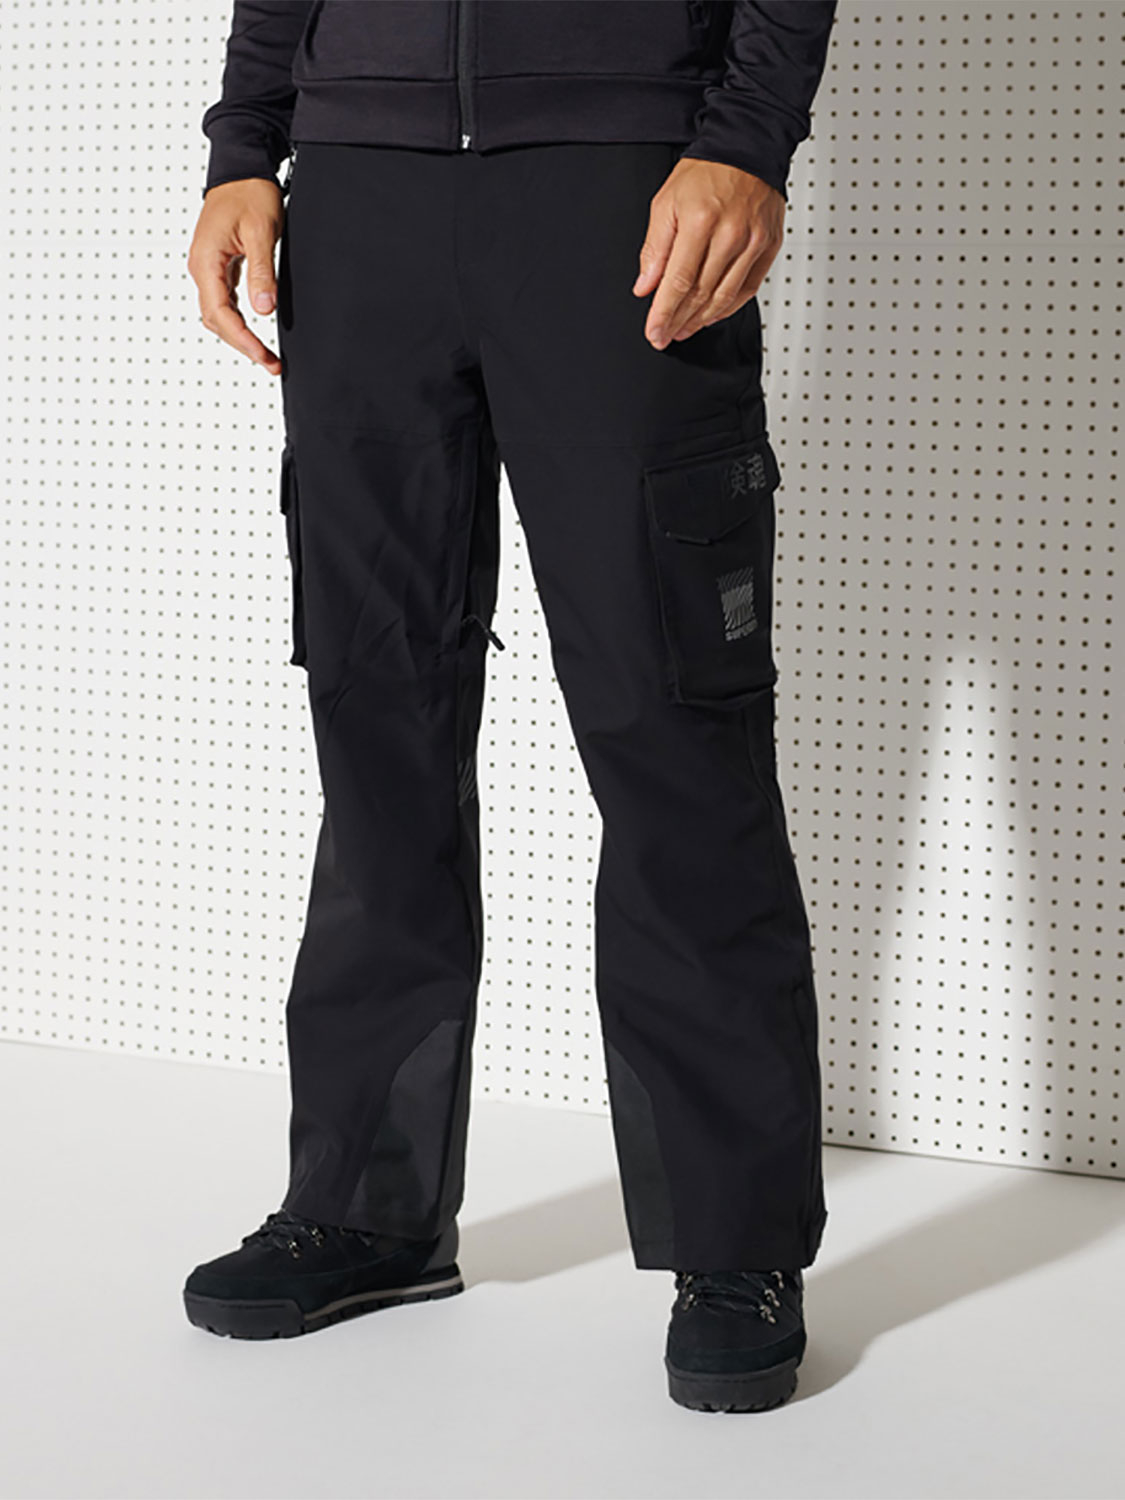 Superdry Mens Ultimate Snow Rescue Pant Black - Size: Small